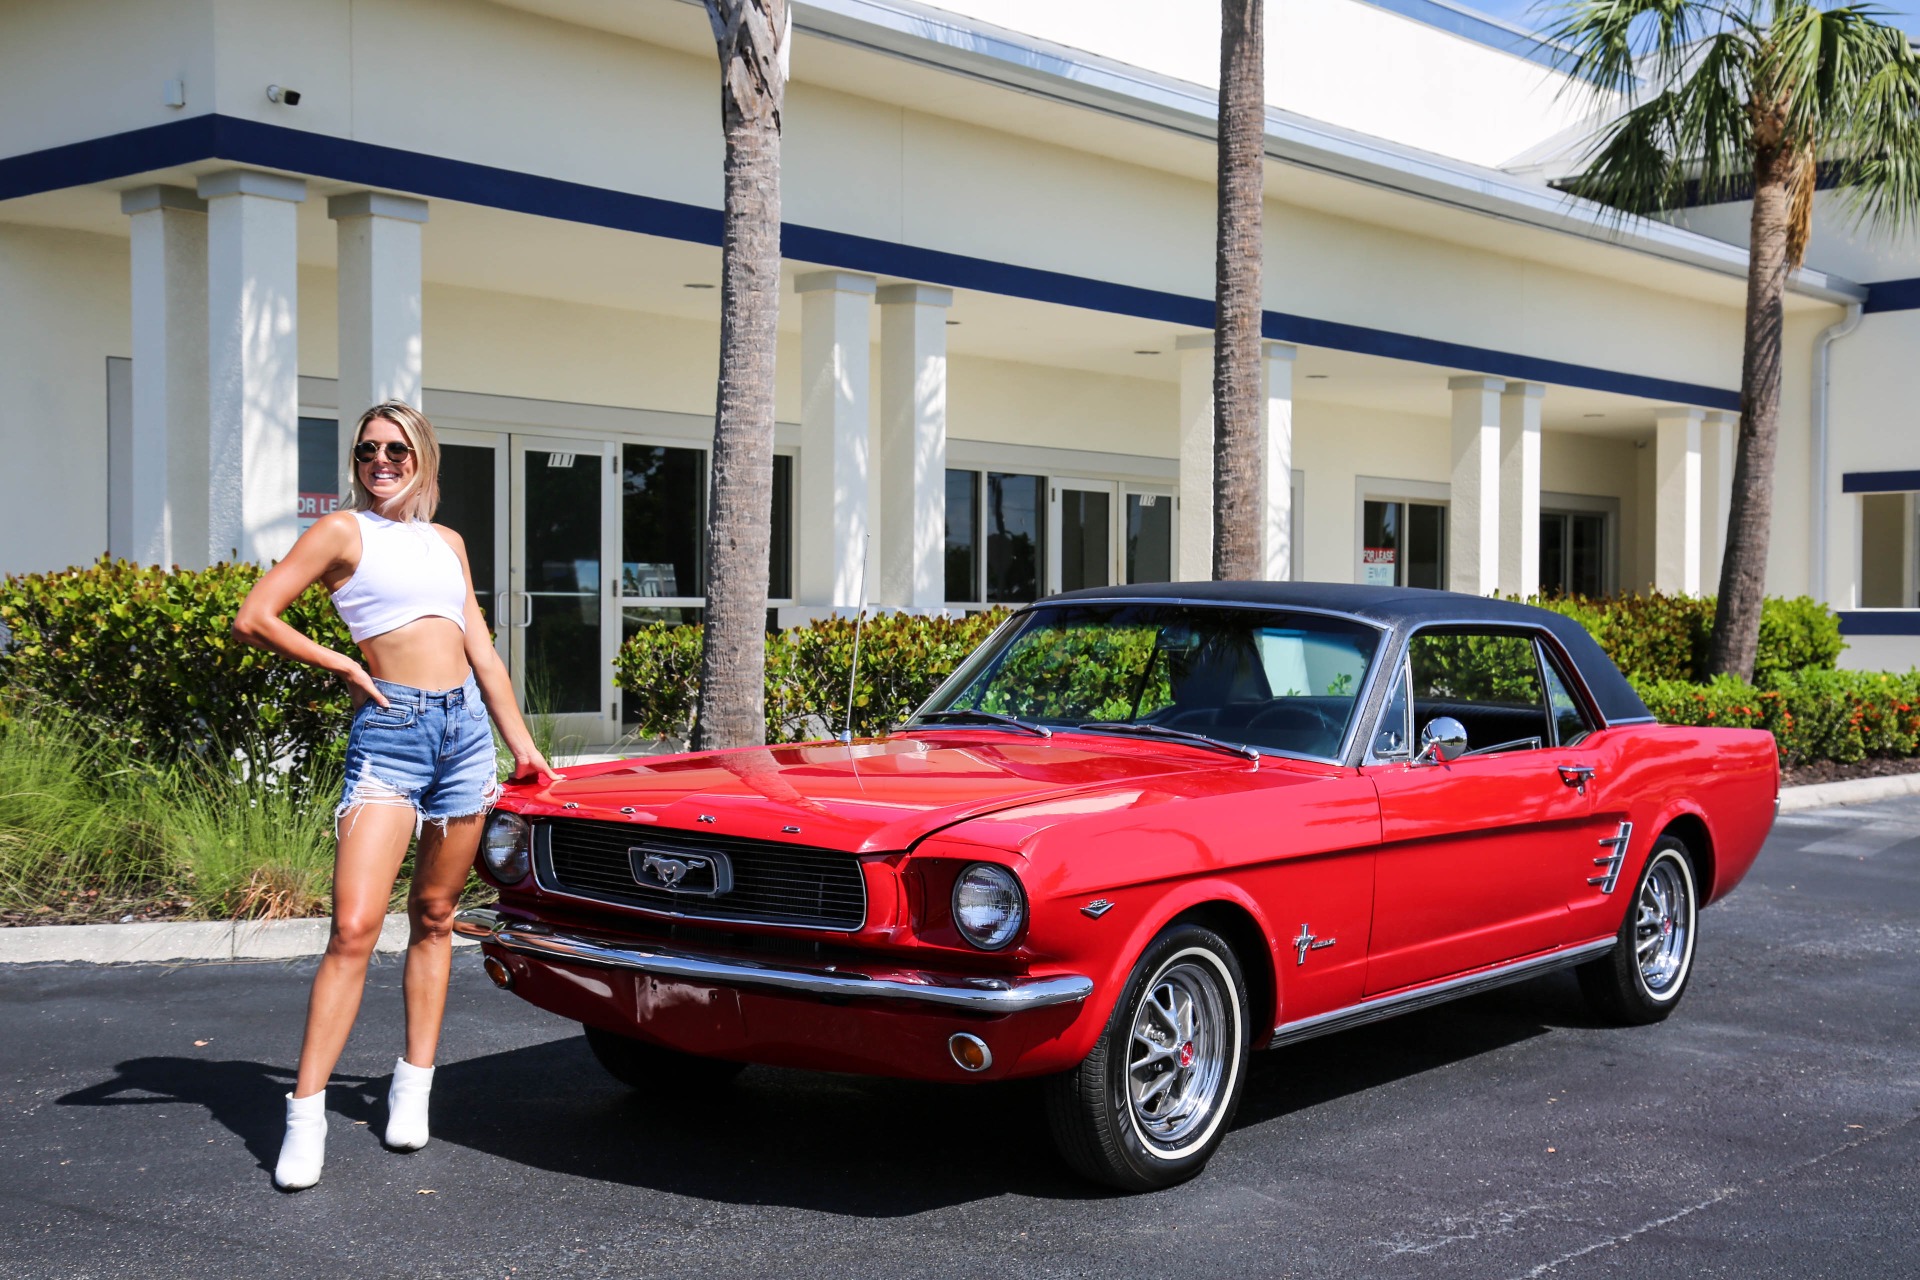 Used 1966 Ford Mustang C Code V8 Manual for sale $25,500 at Muscle Cars for Sale Inc. in Fort Myers FL 33912 1